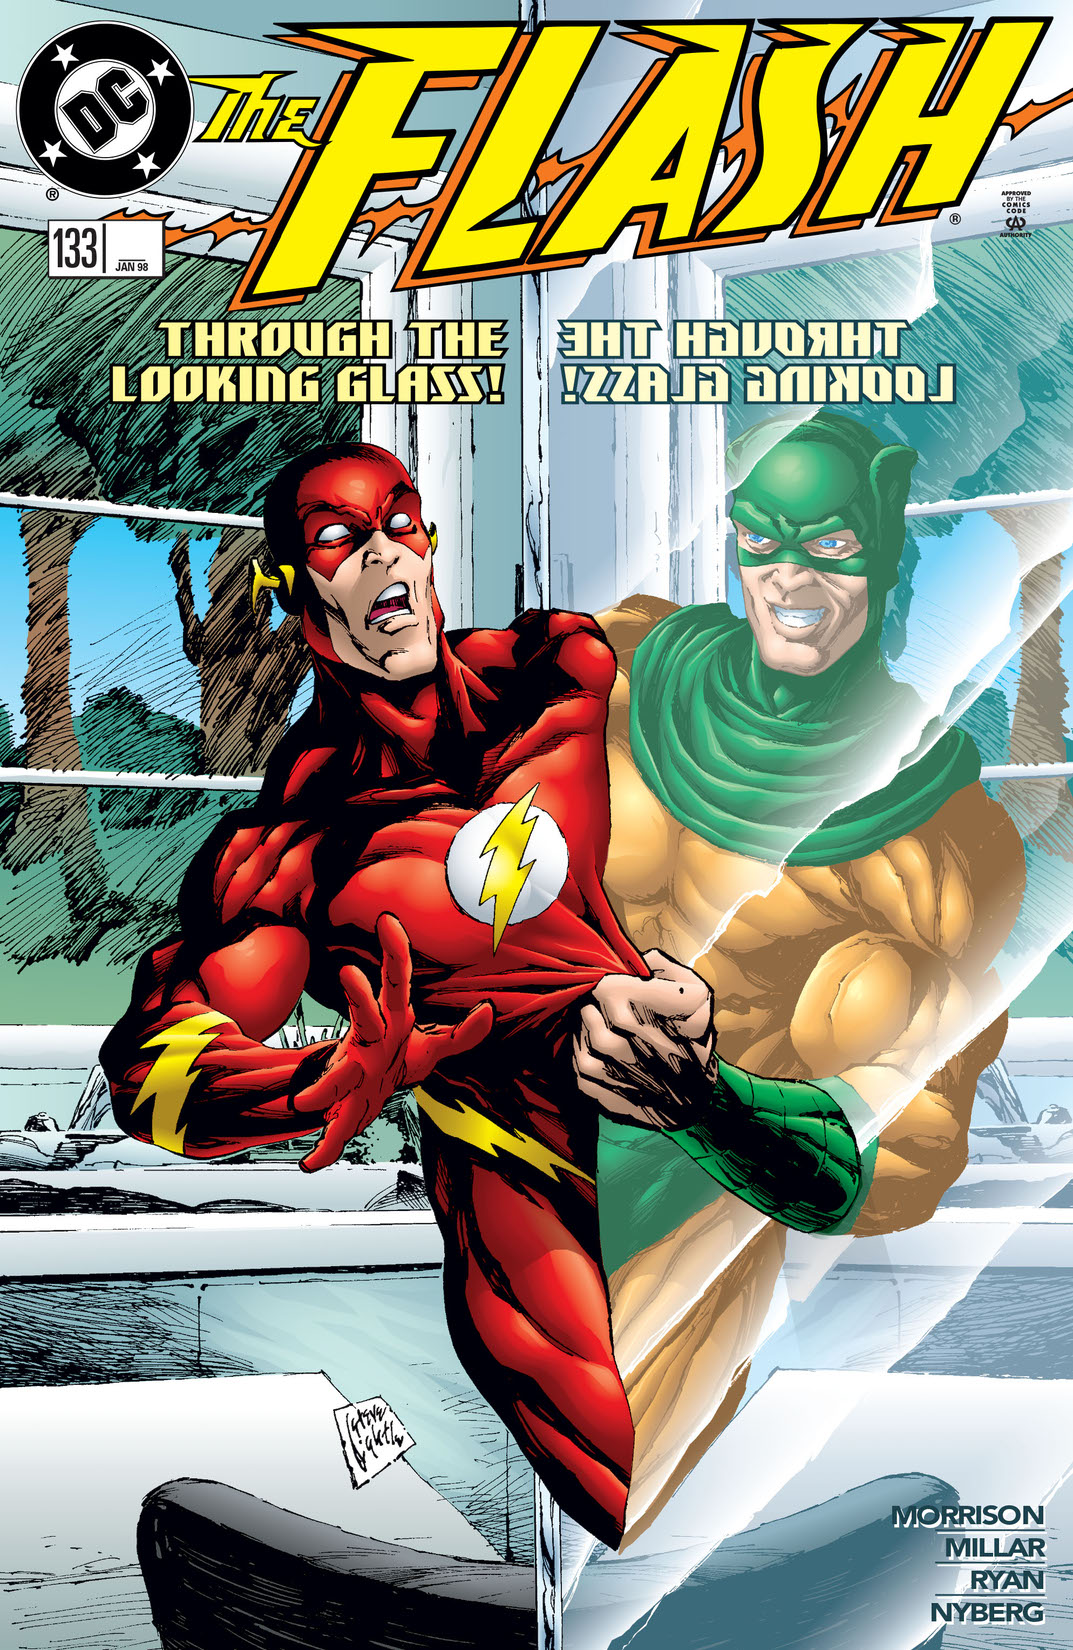 The Flash (1987-) #133 preview images